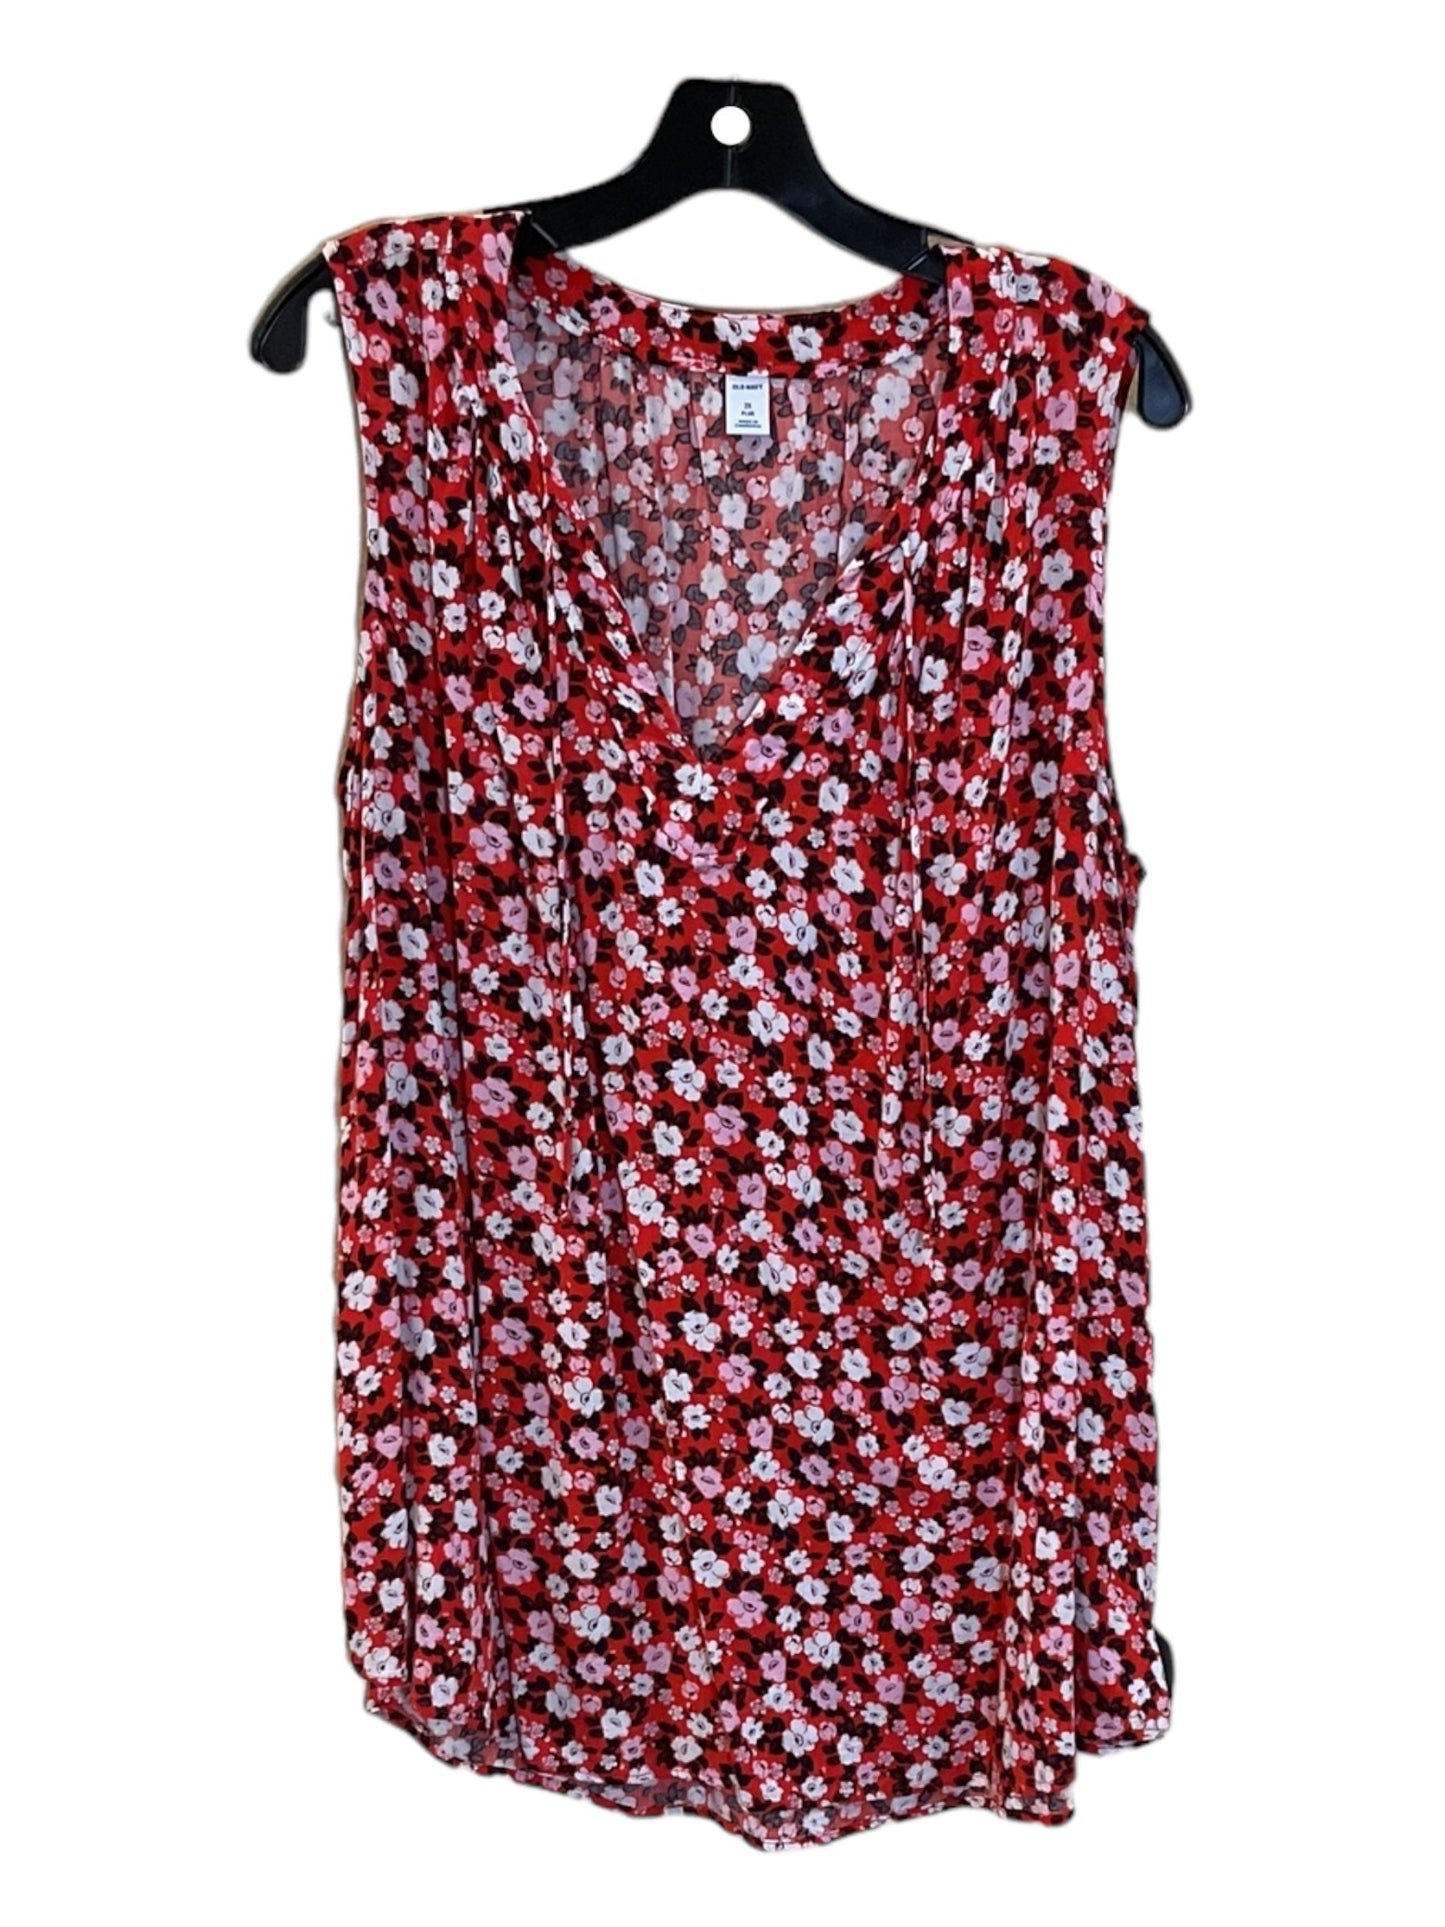 Red & White Top Sleeveless Old Navy, Size 2x